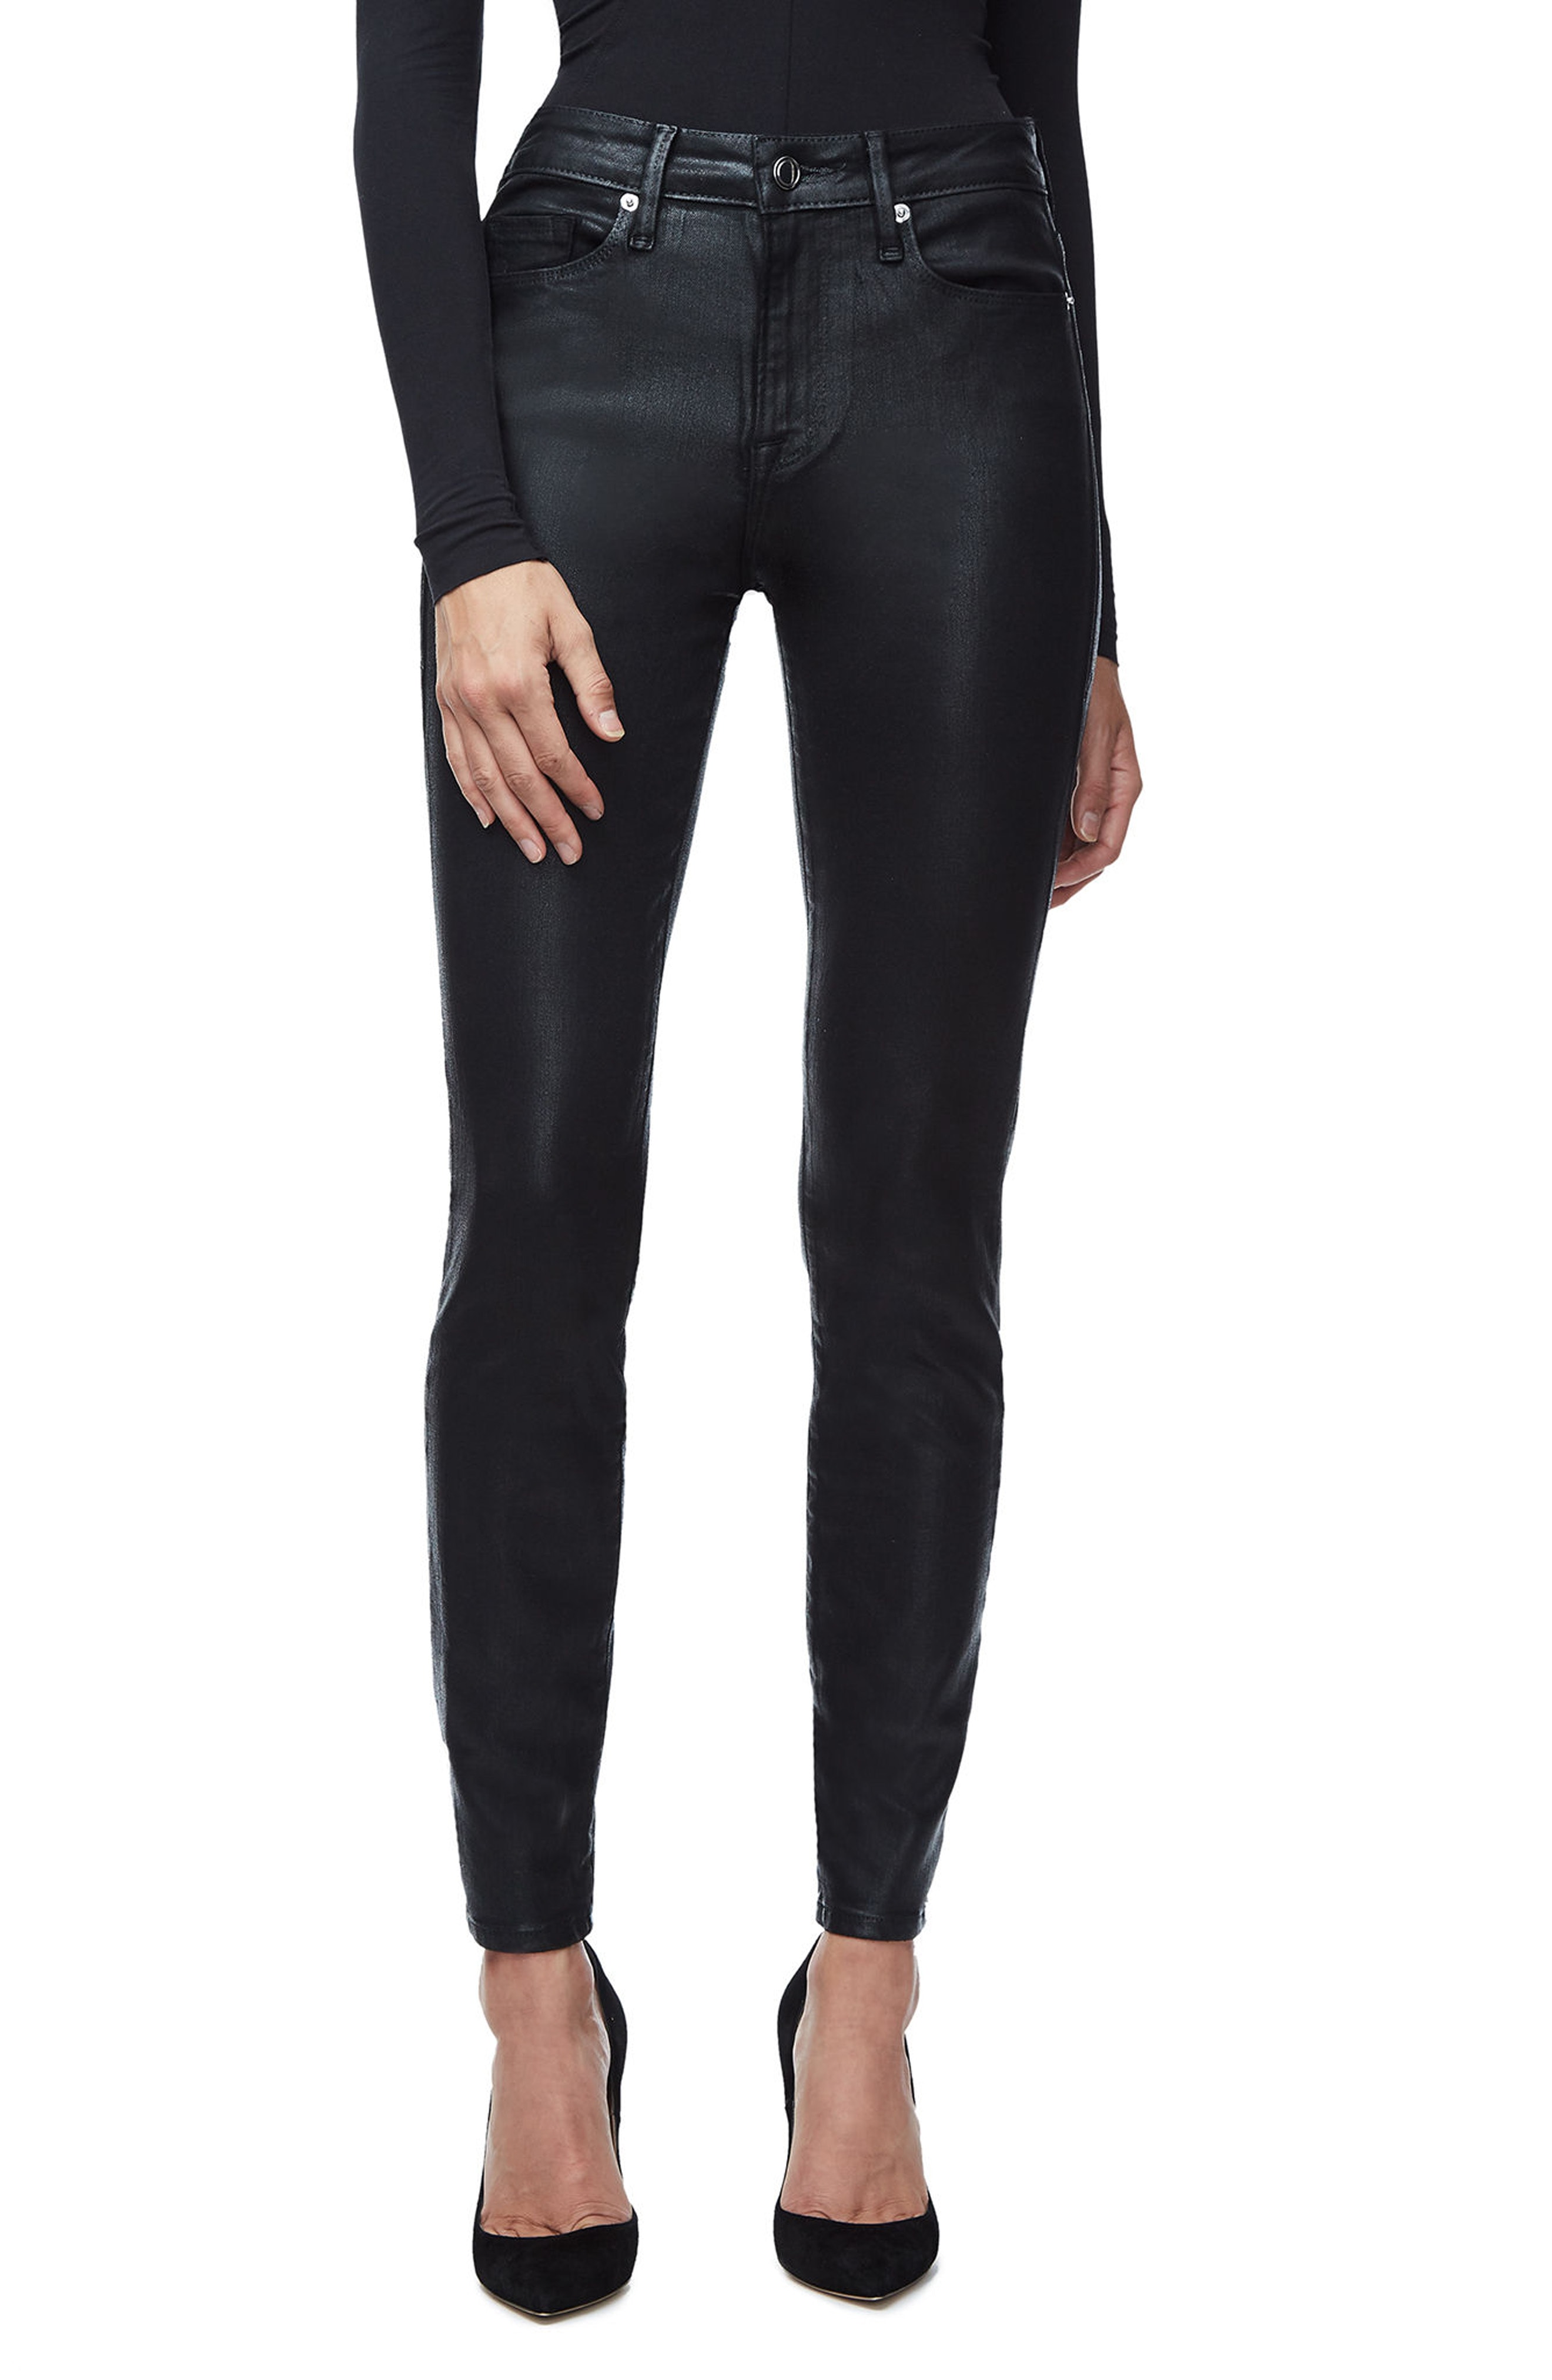 leather pants women | Nordstrom